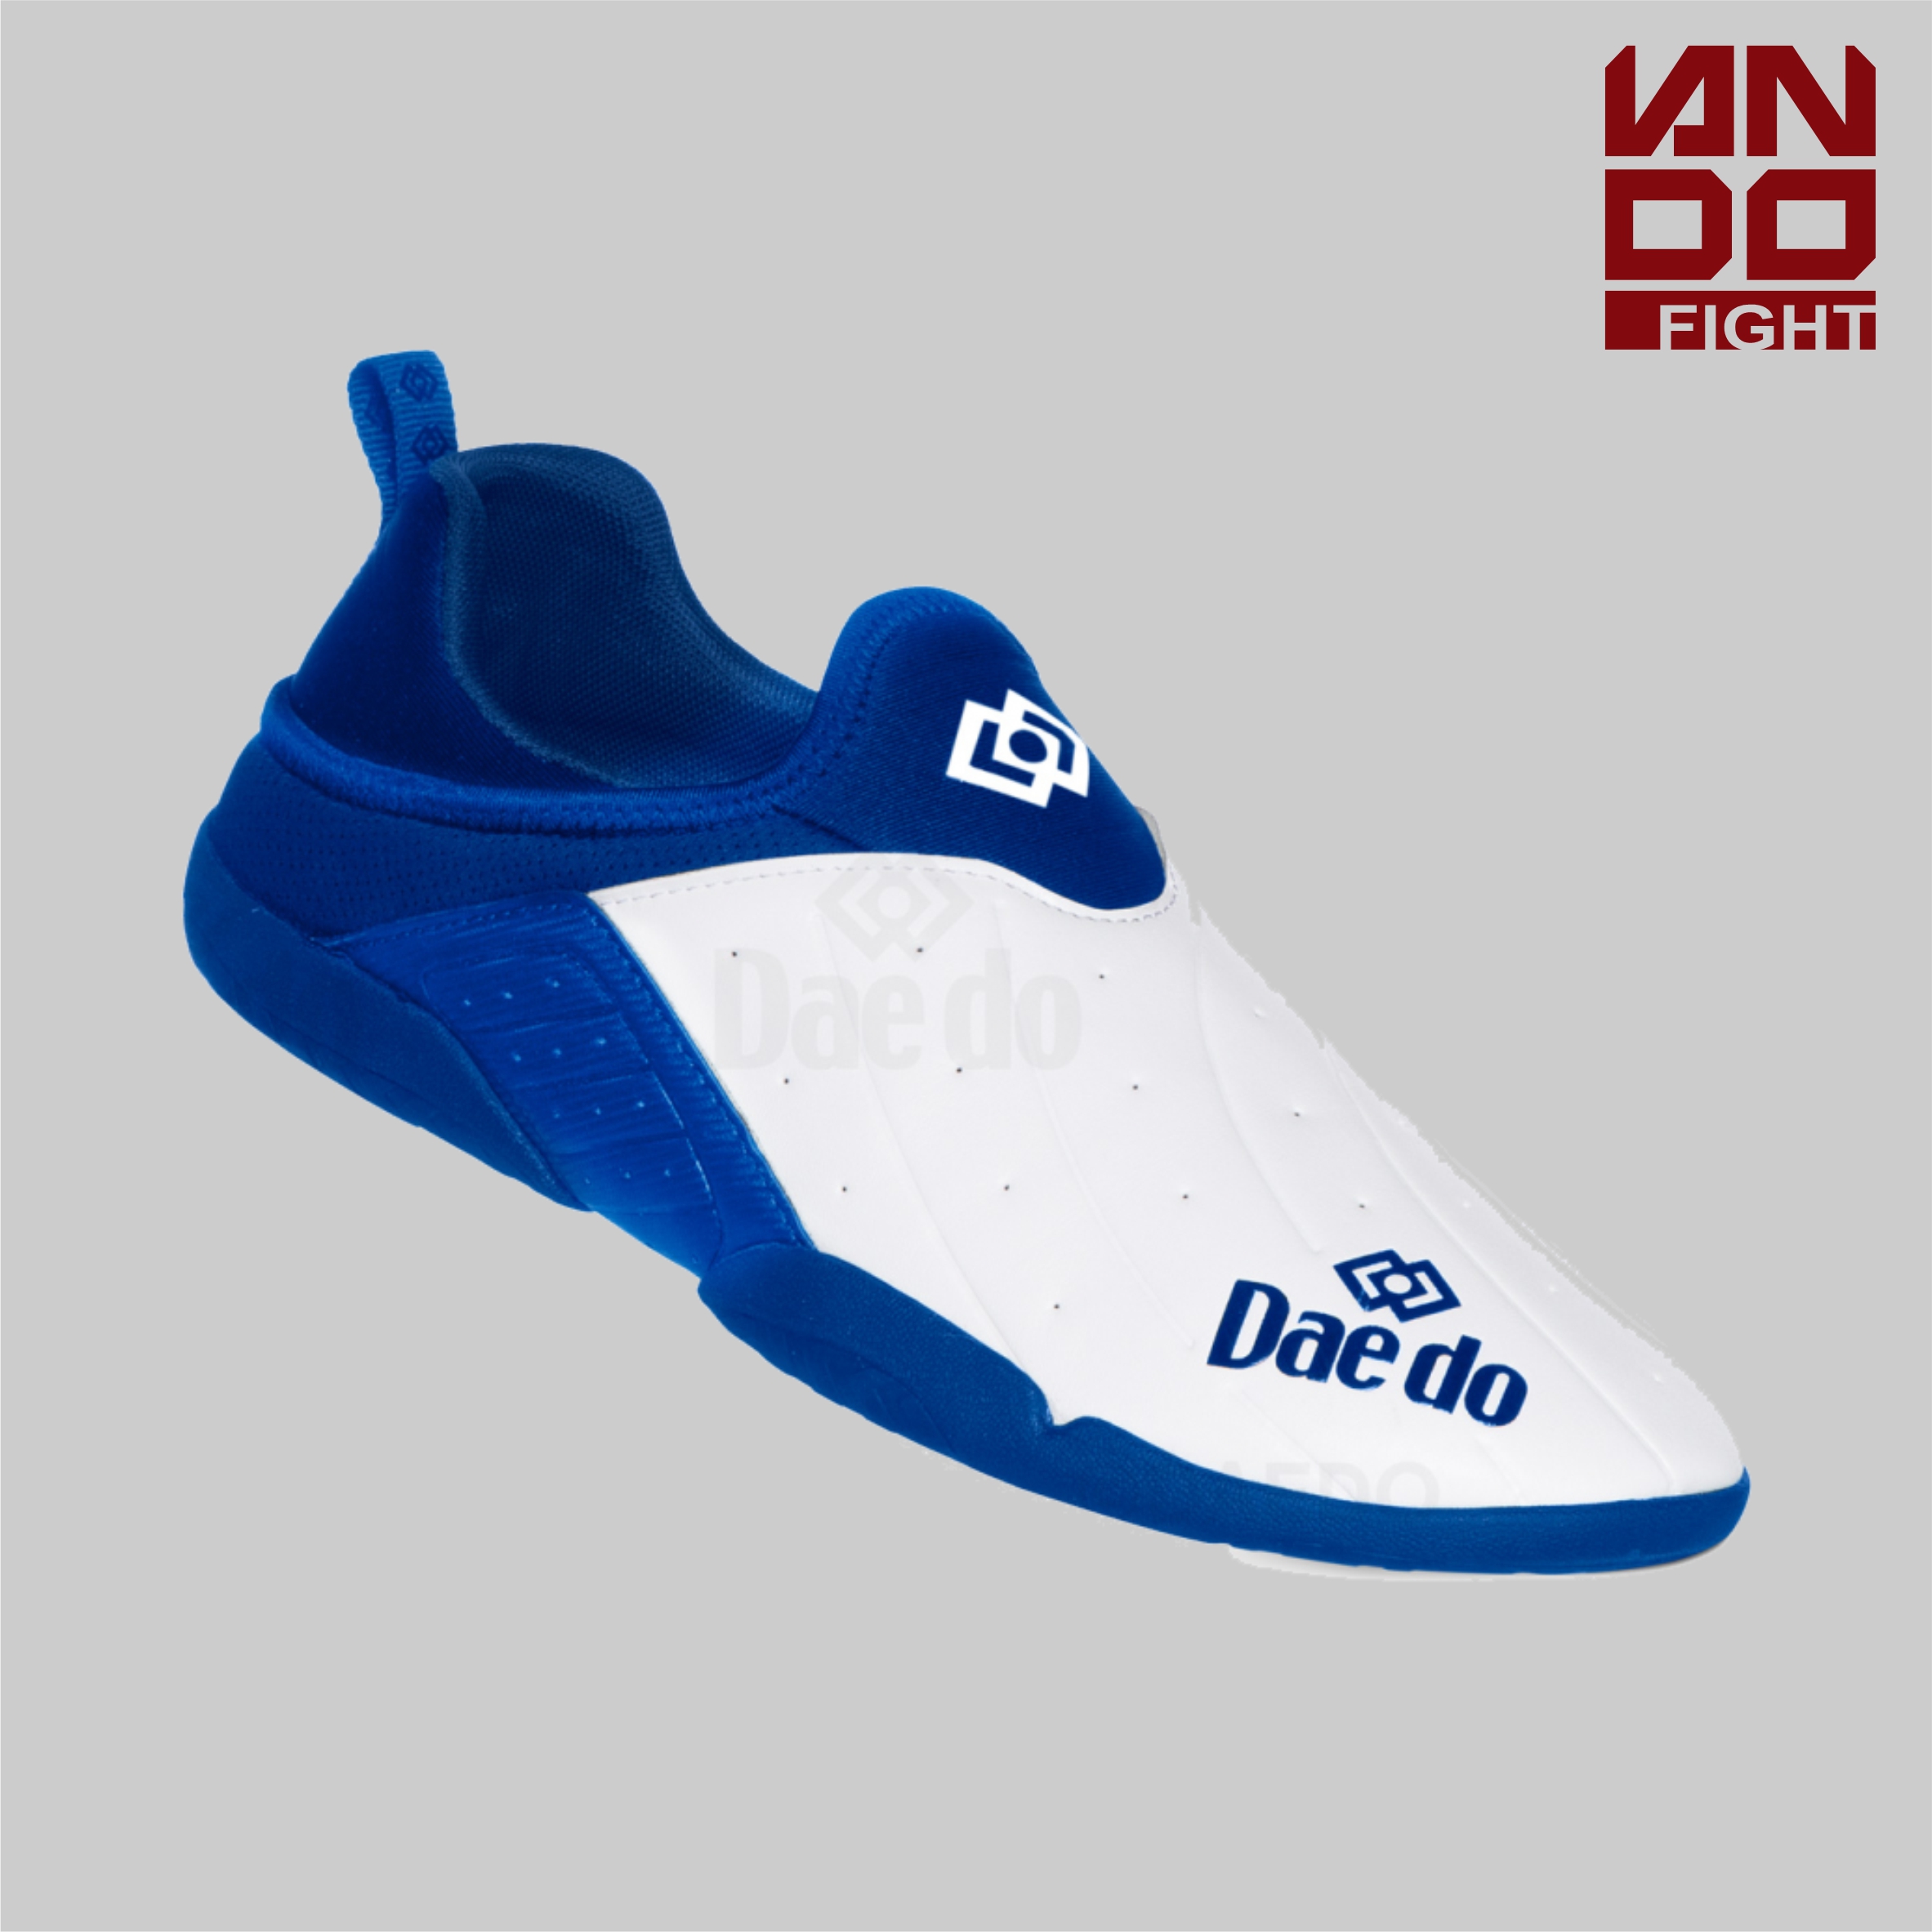 DAEDO Sneakers "Action" Blue